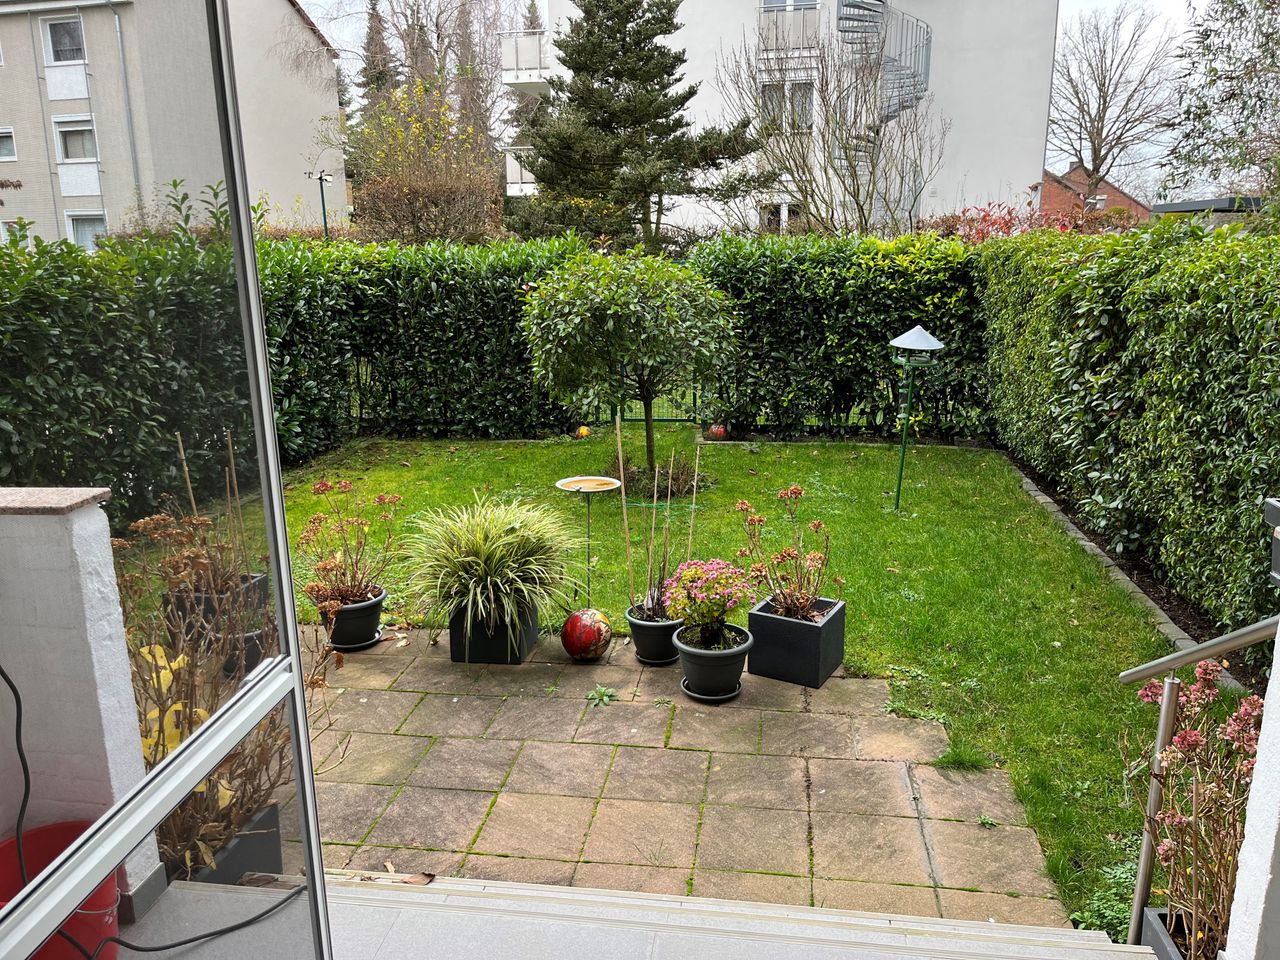 FULLY FURNISHED APARTMENT WITH GARDEN AND TERRACE ON THE RIVER RHINE